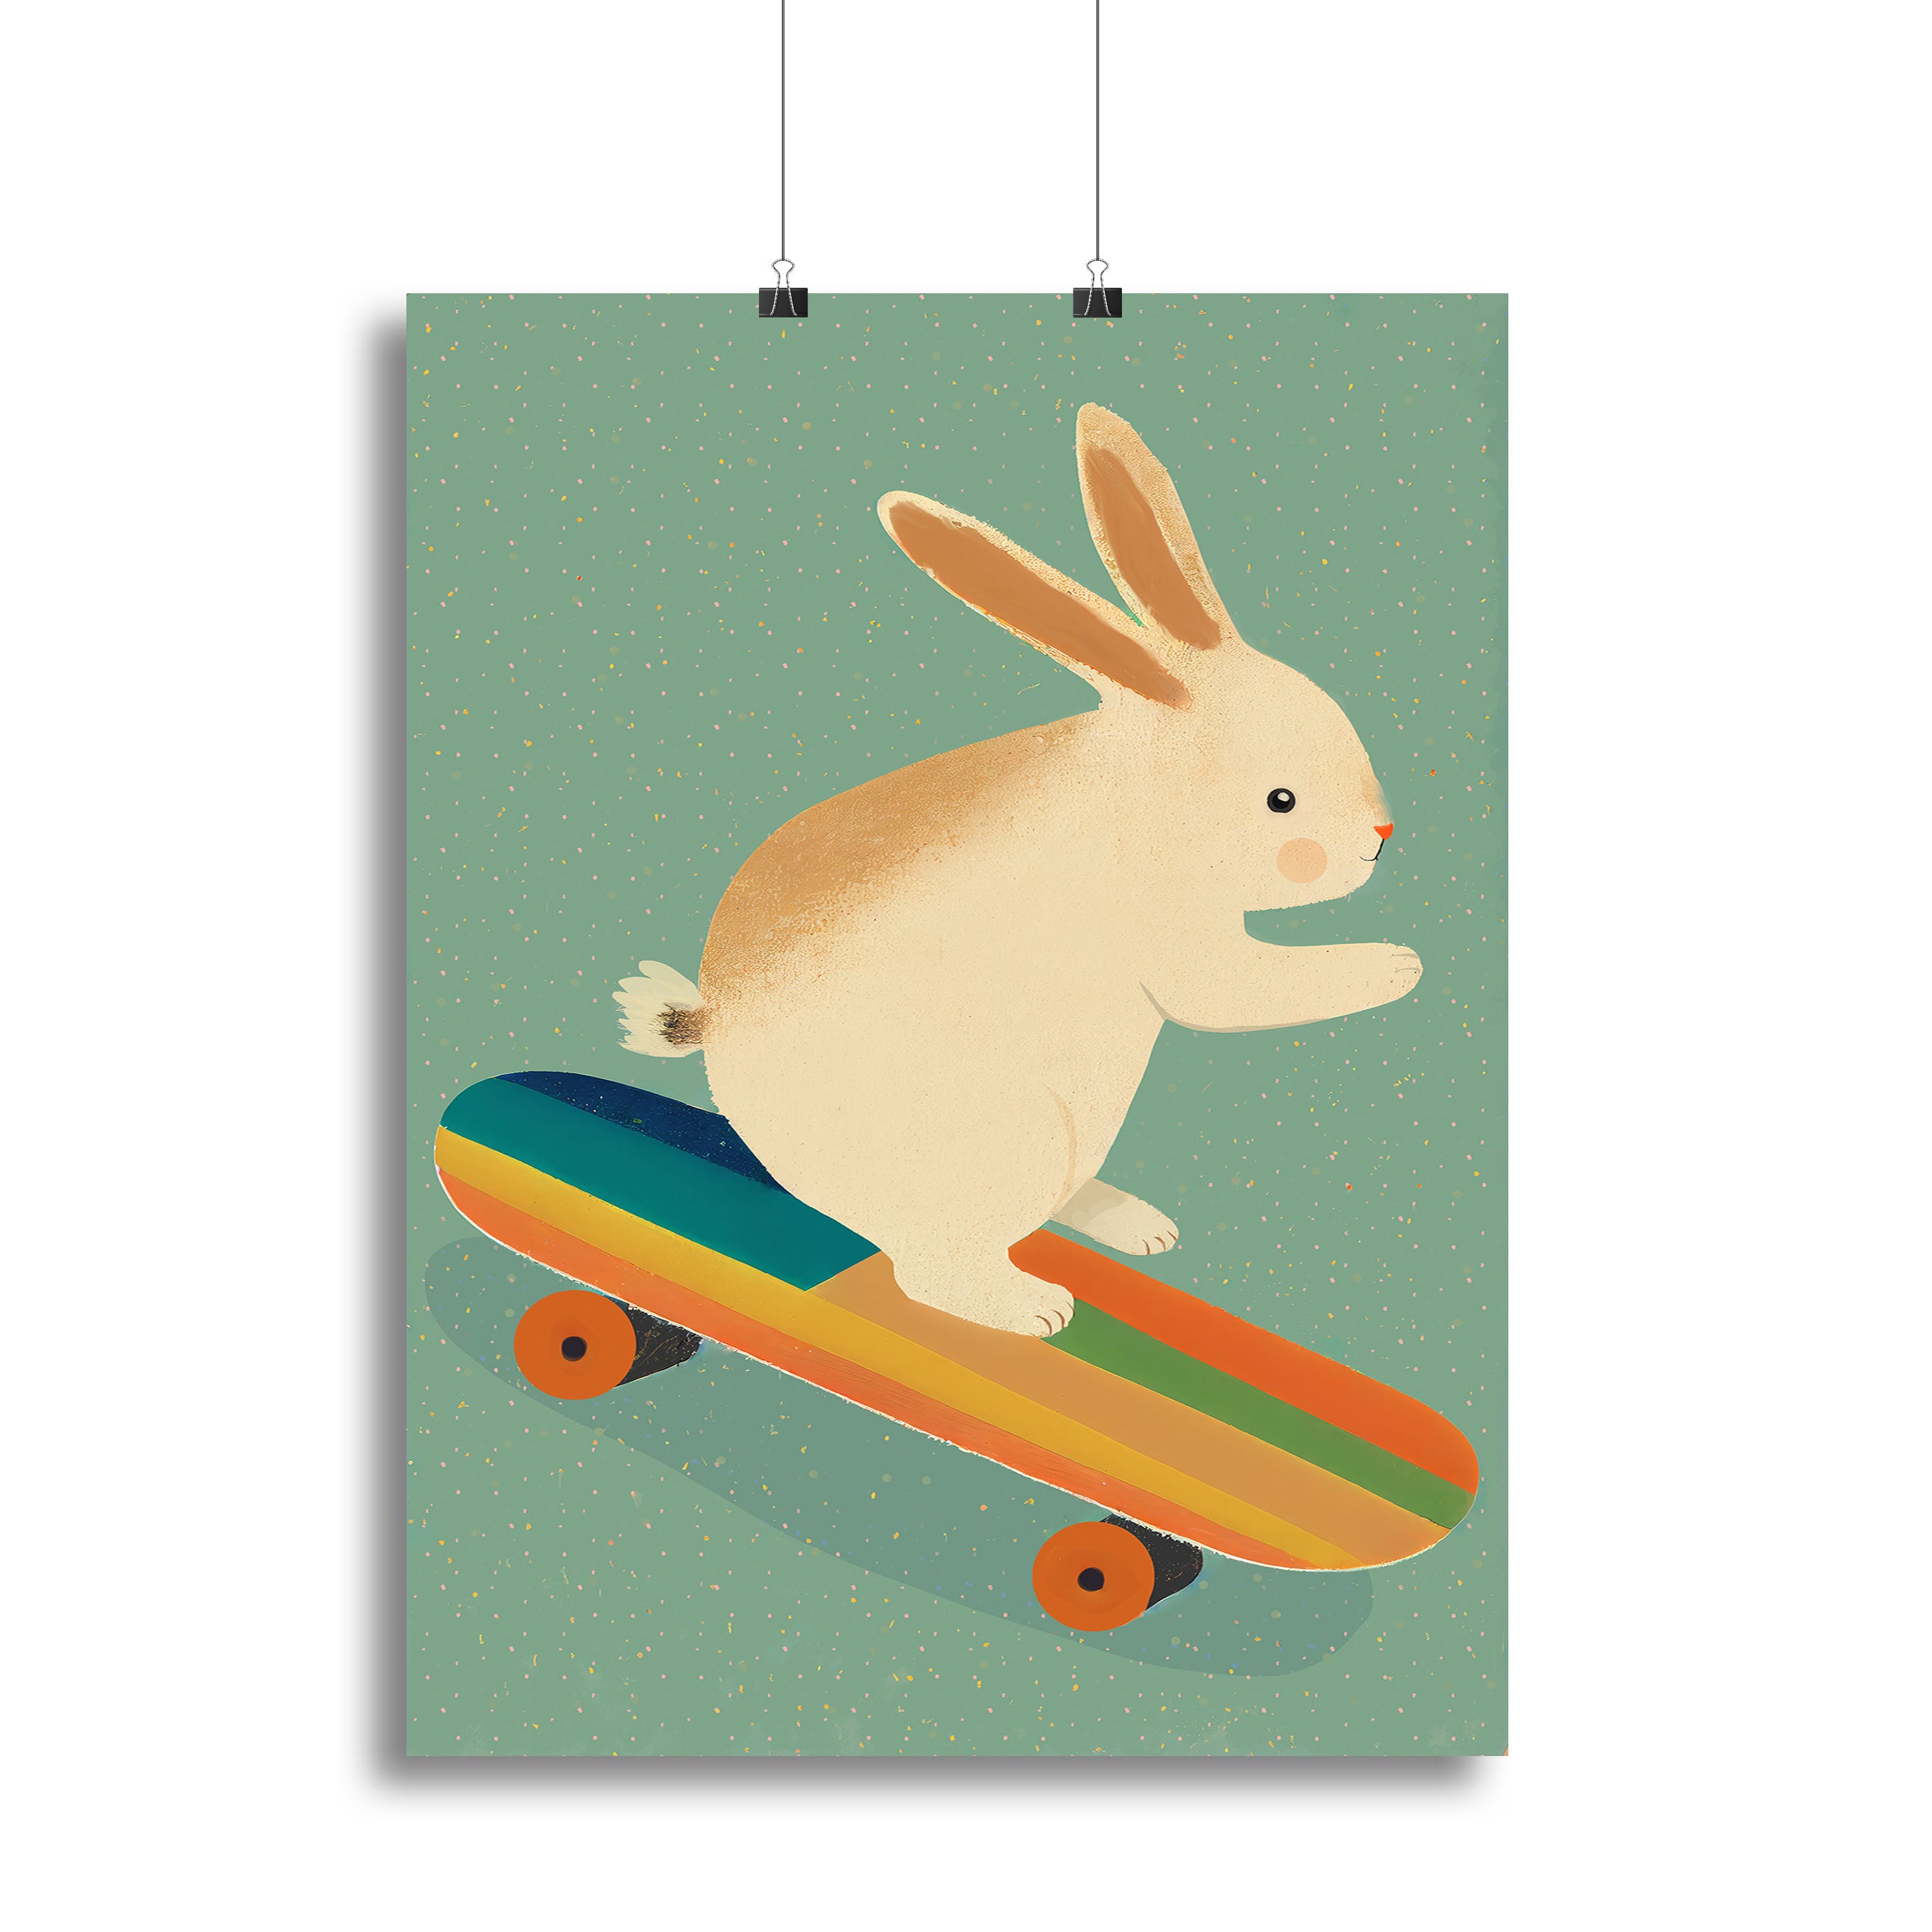 Bunny On Skateboard Canvas Print or Poster - 1x - 2